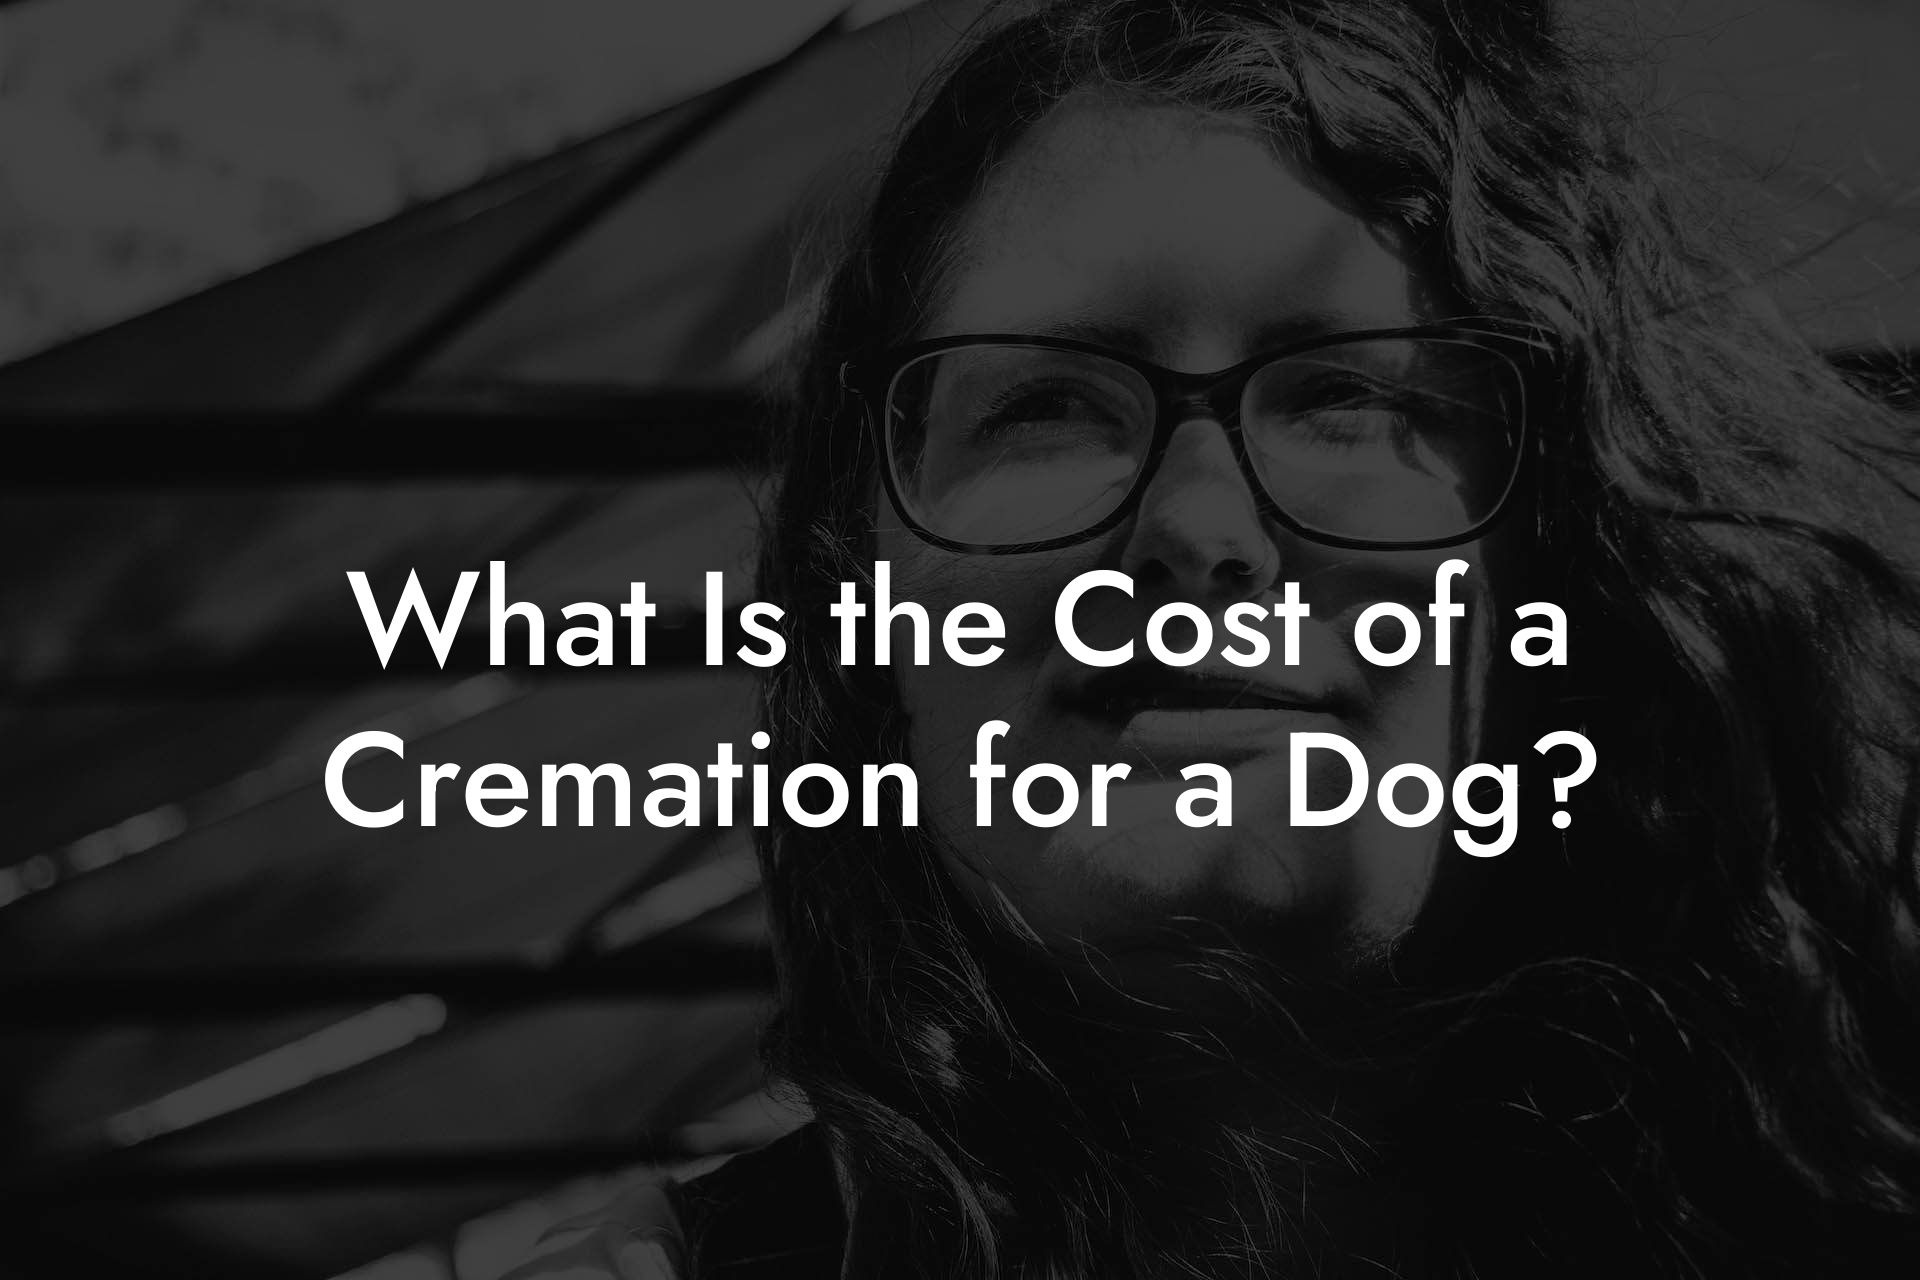 What Is the Cost of a Cremation for a Dog